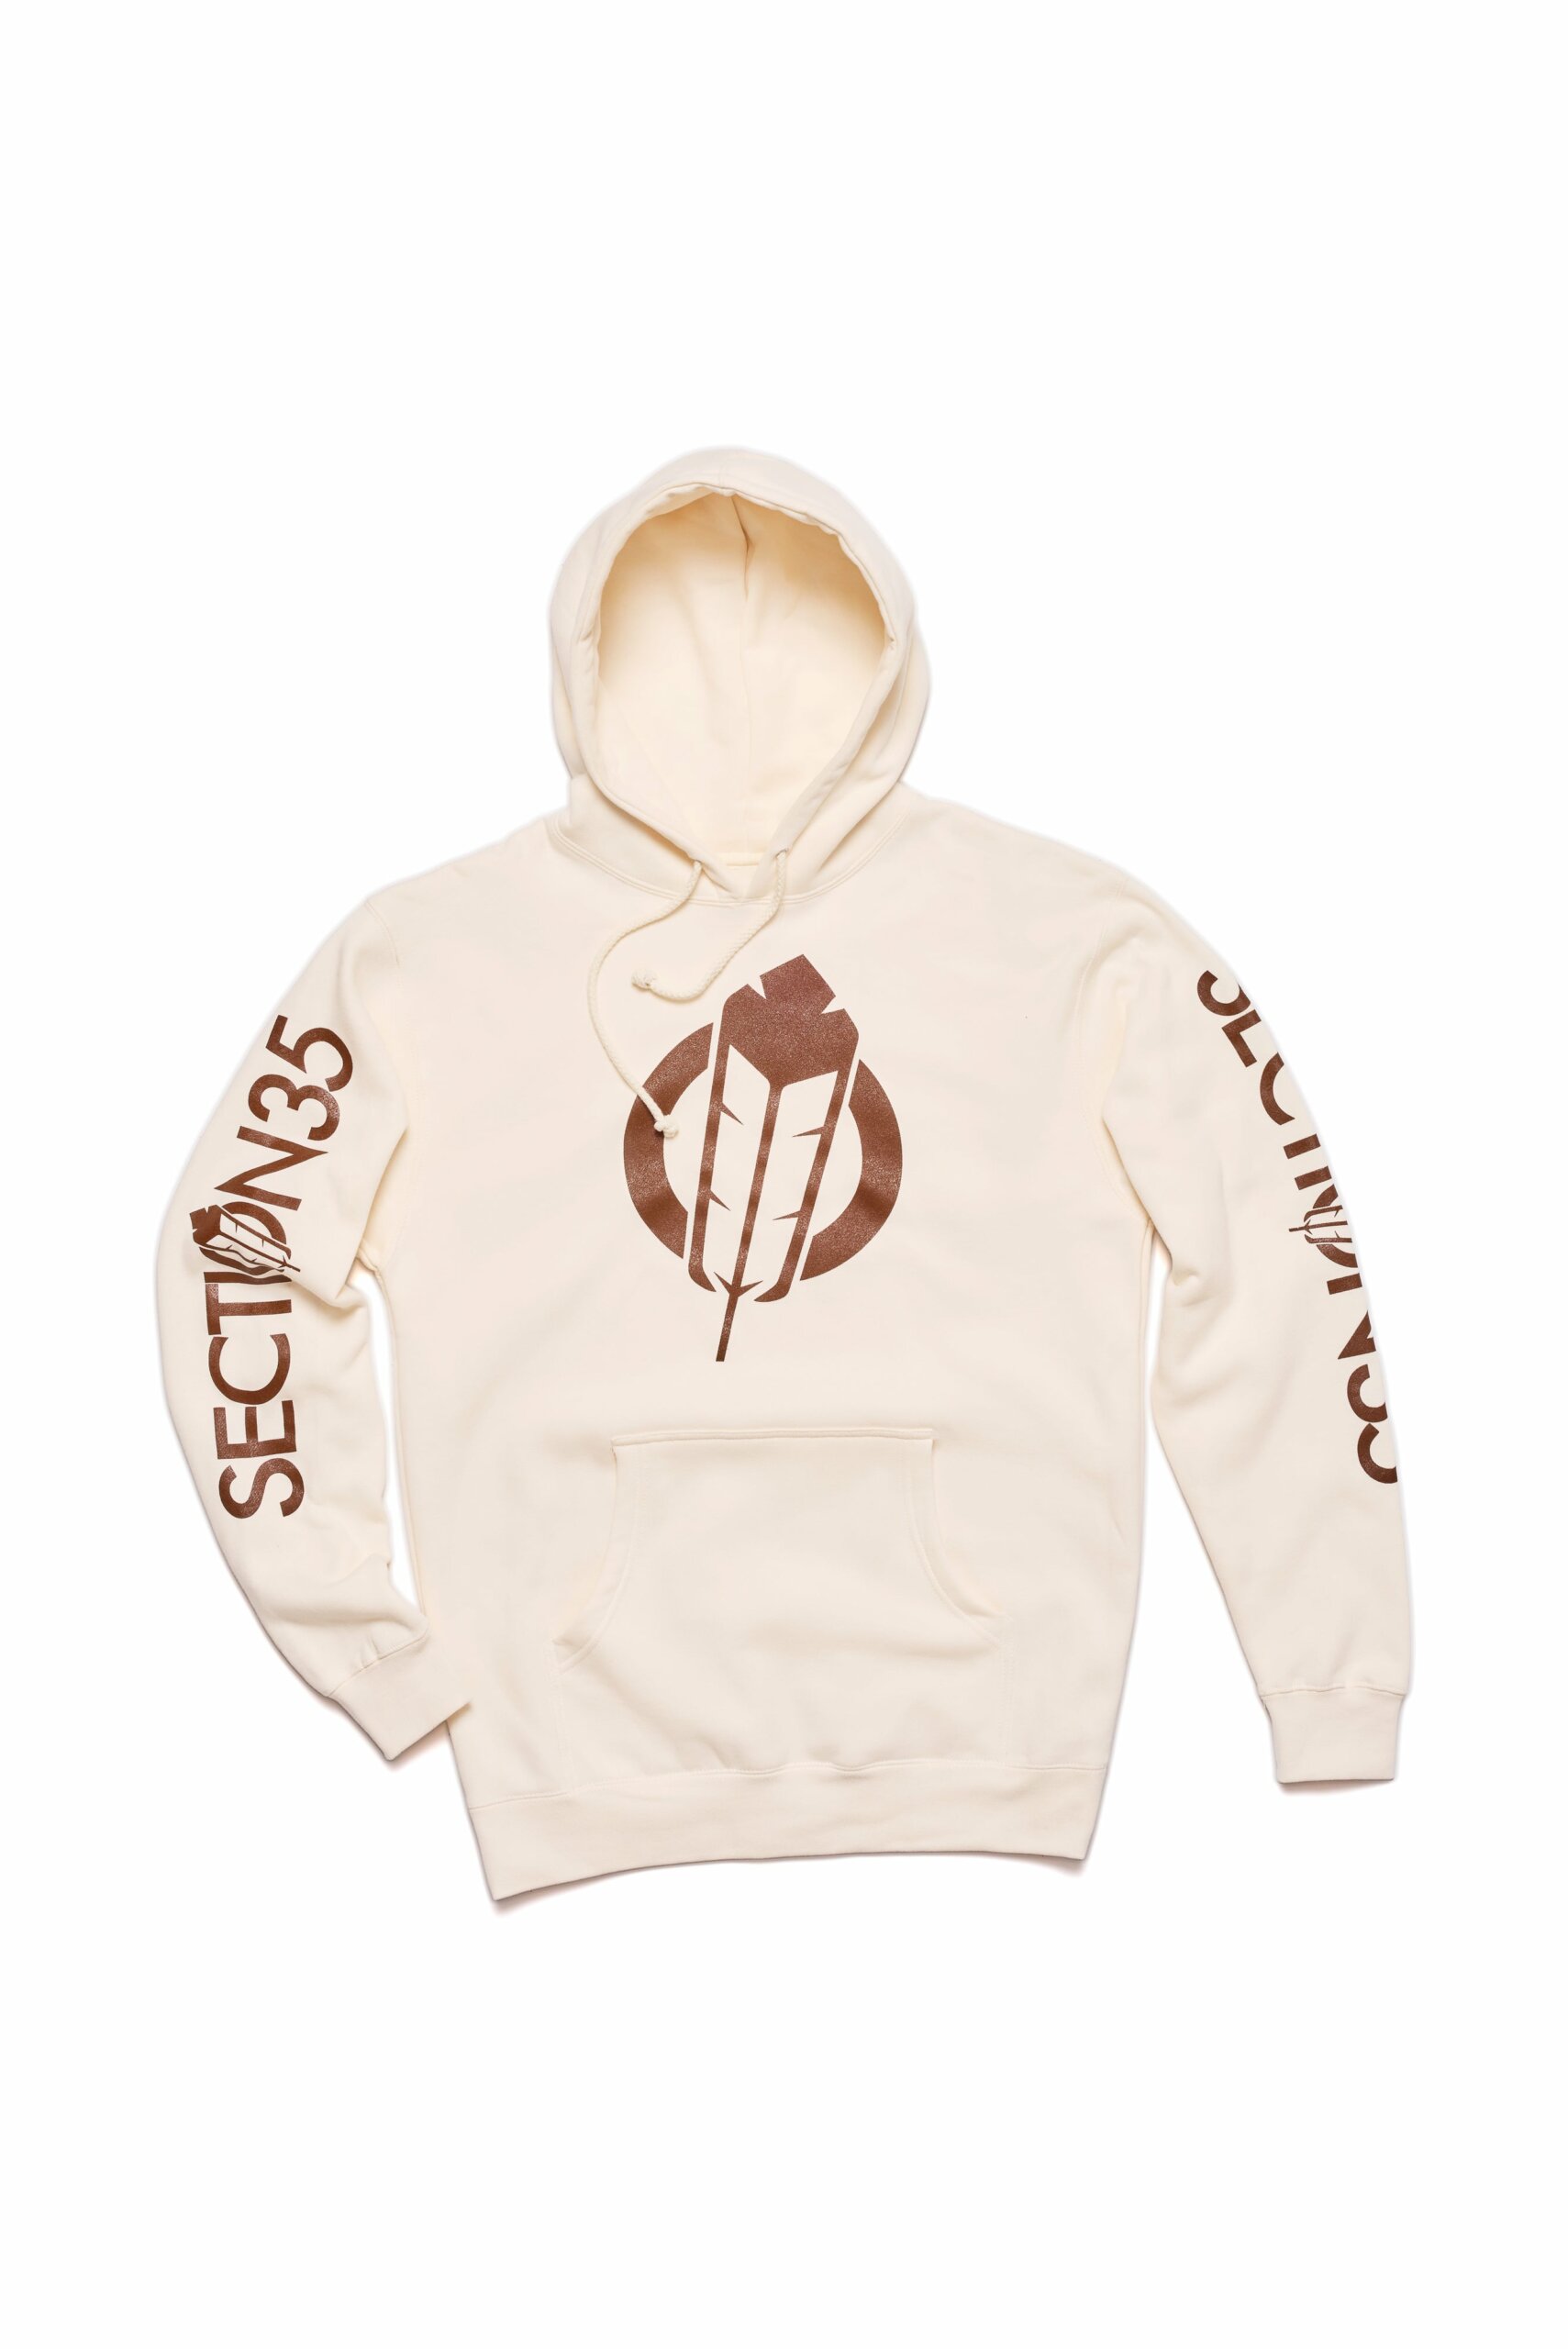 Men's Neutrals Og Tf Hoodie - Bone/Earth Small SECTION 35